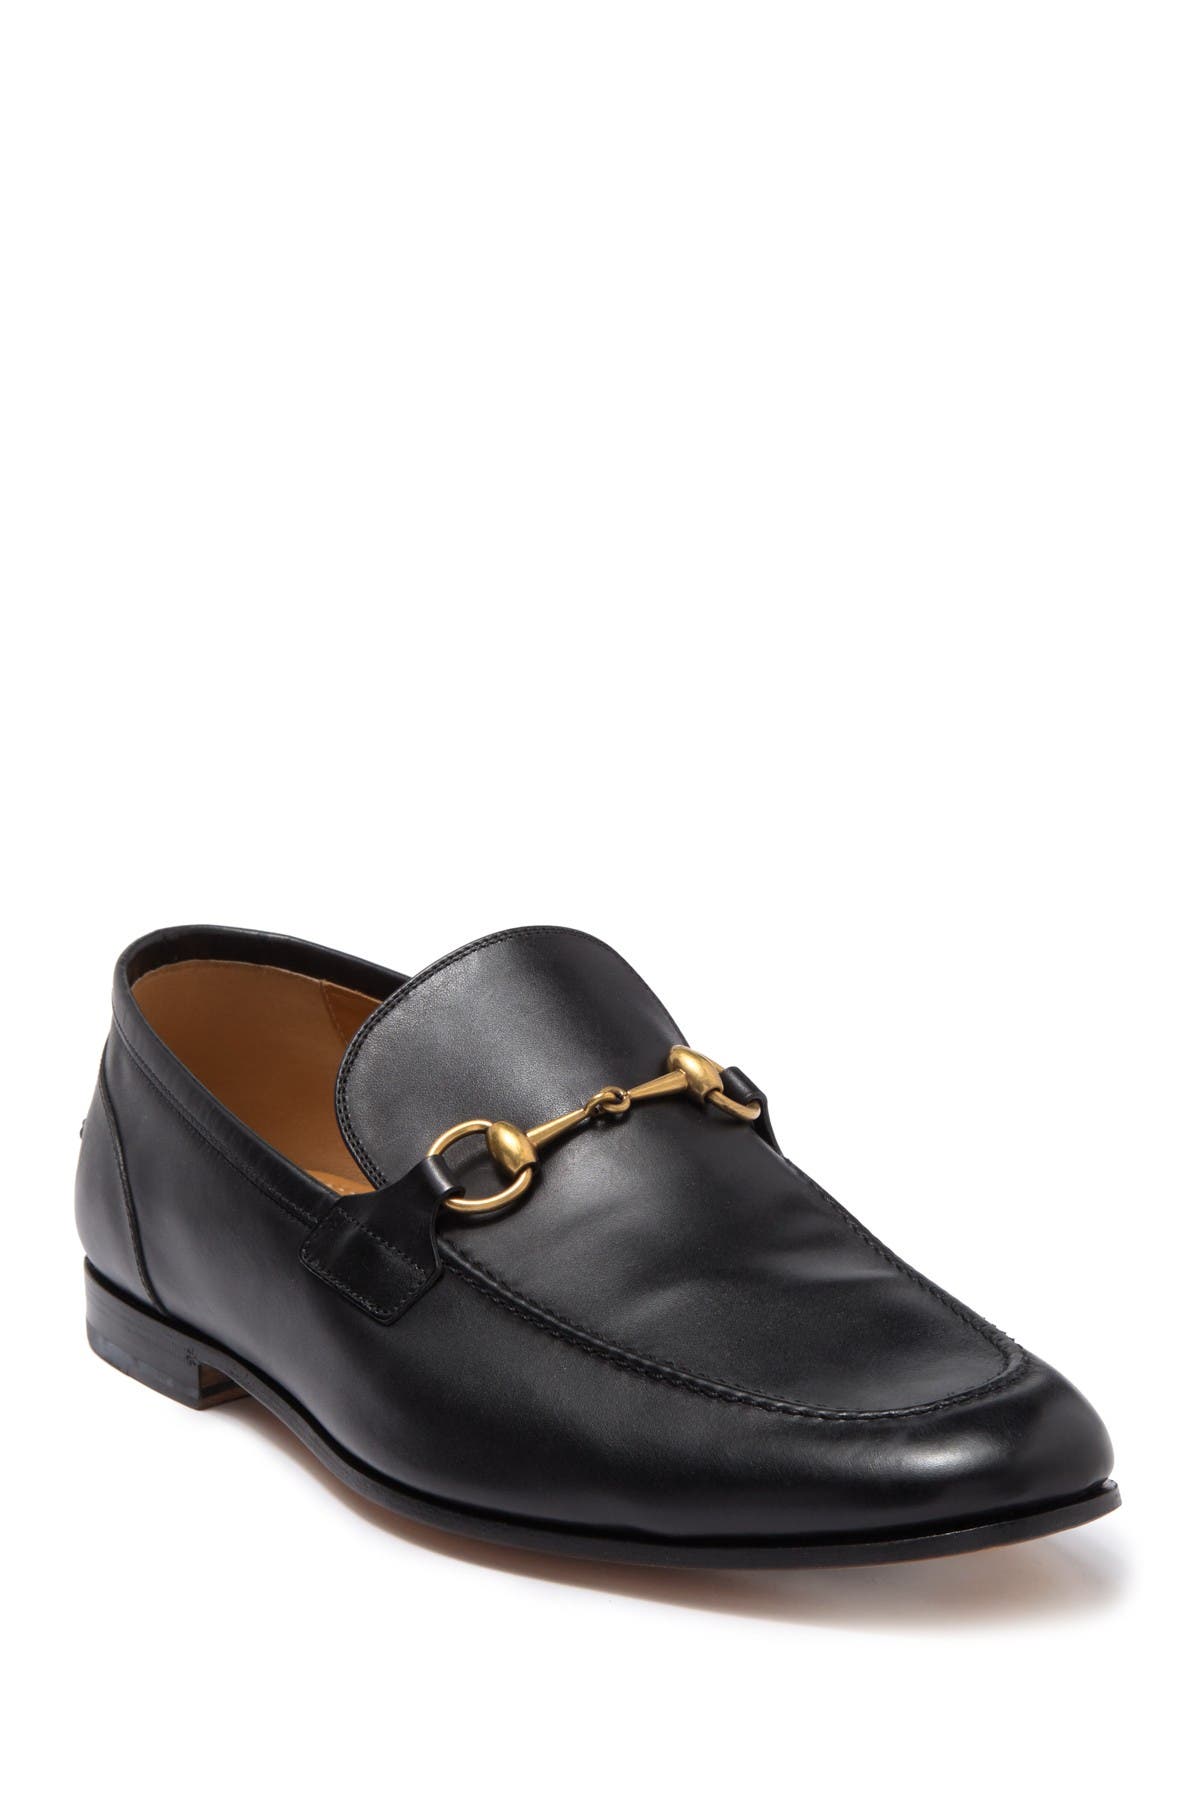 GUCCI | Betis Leather Loafer 